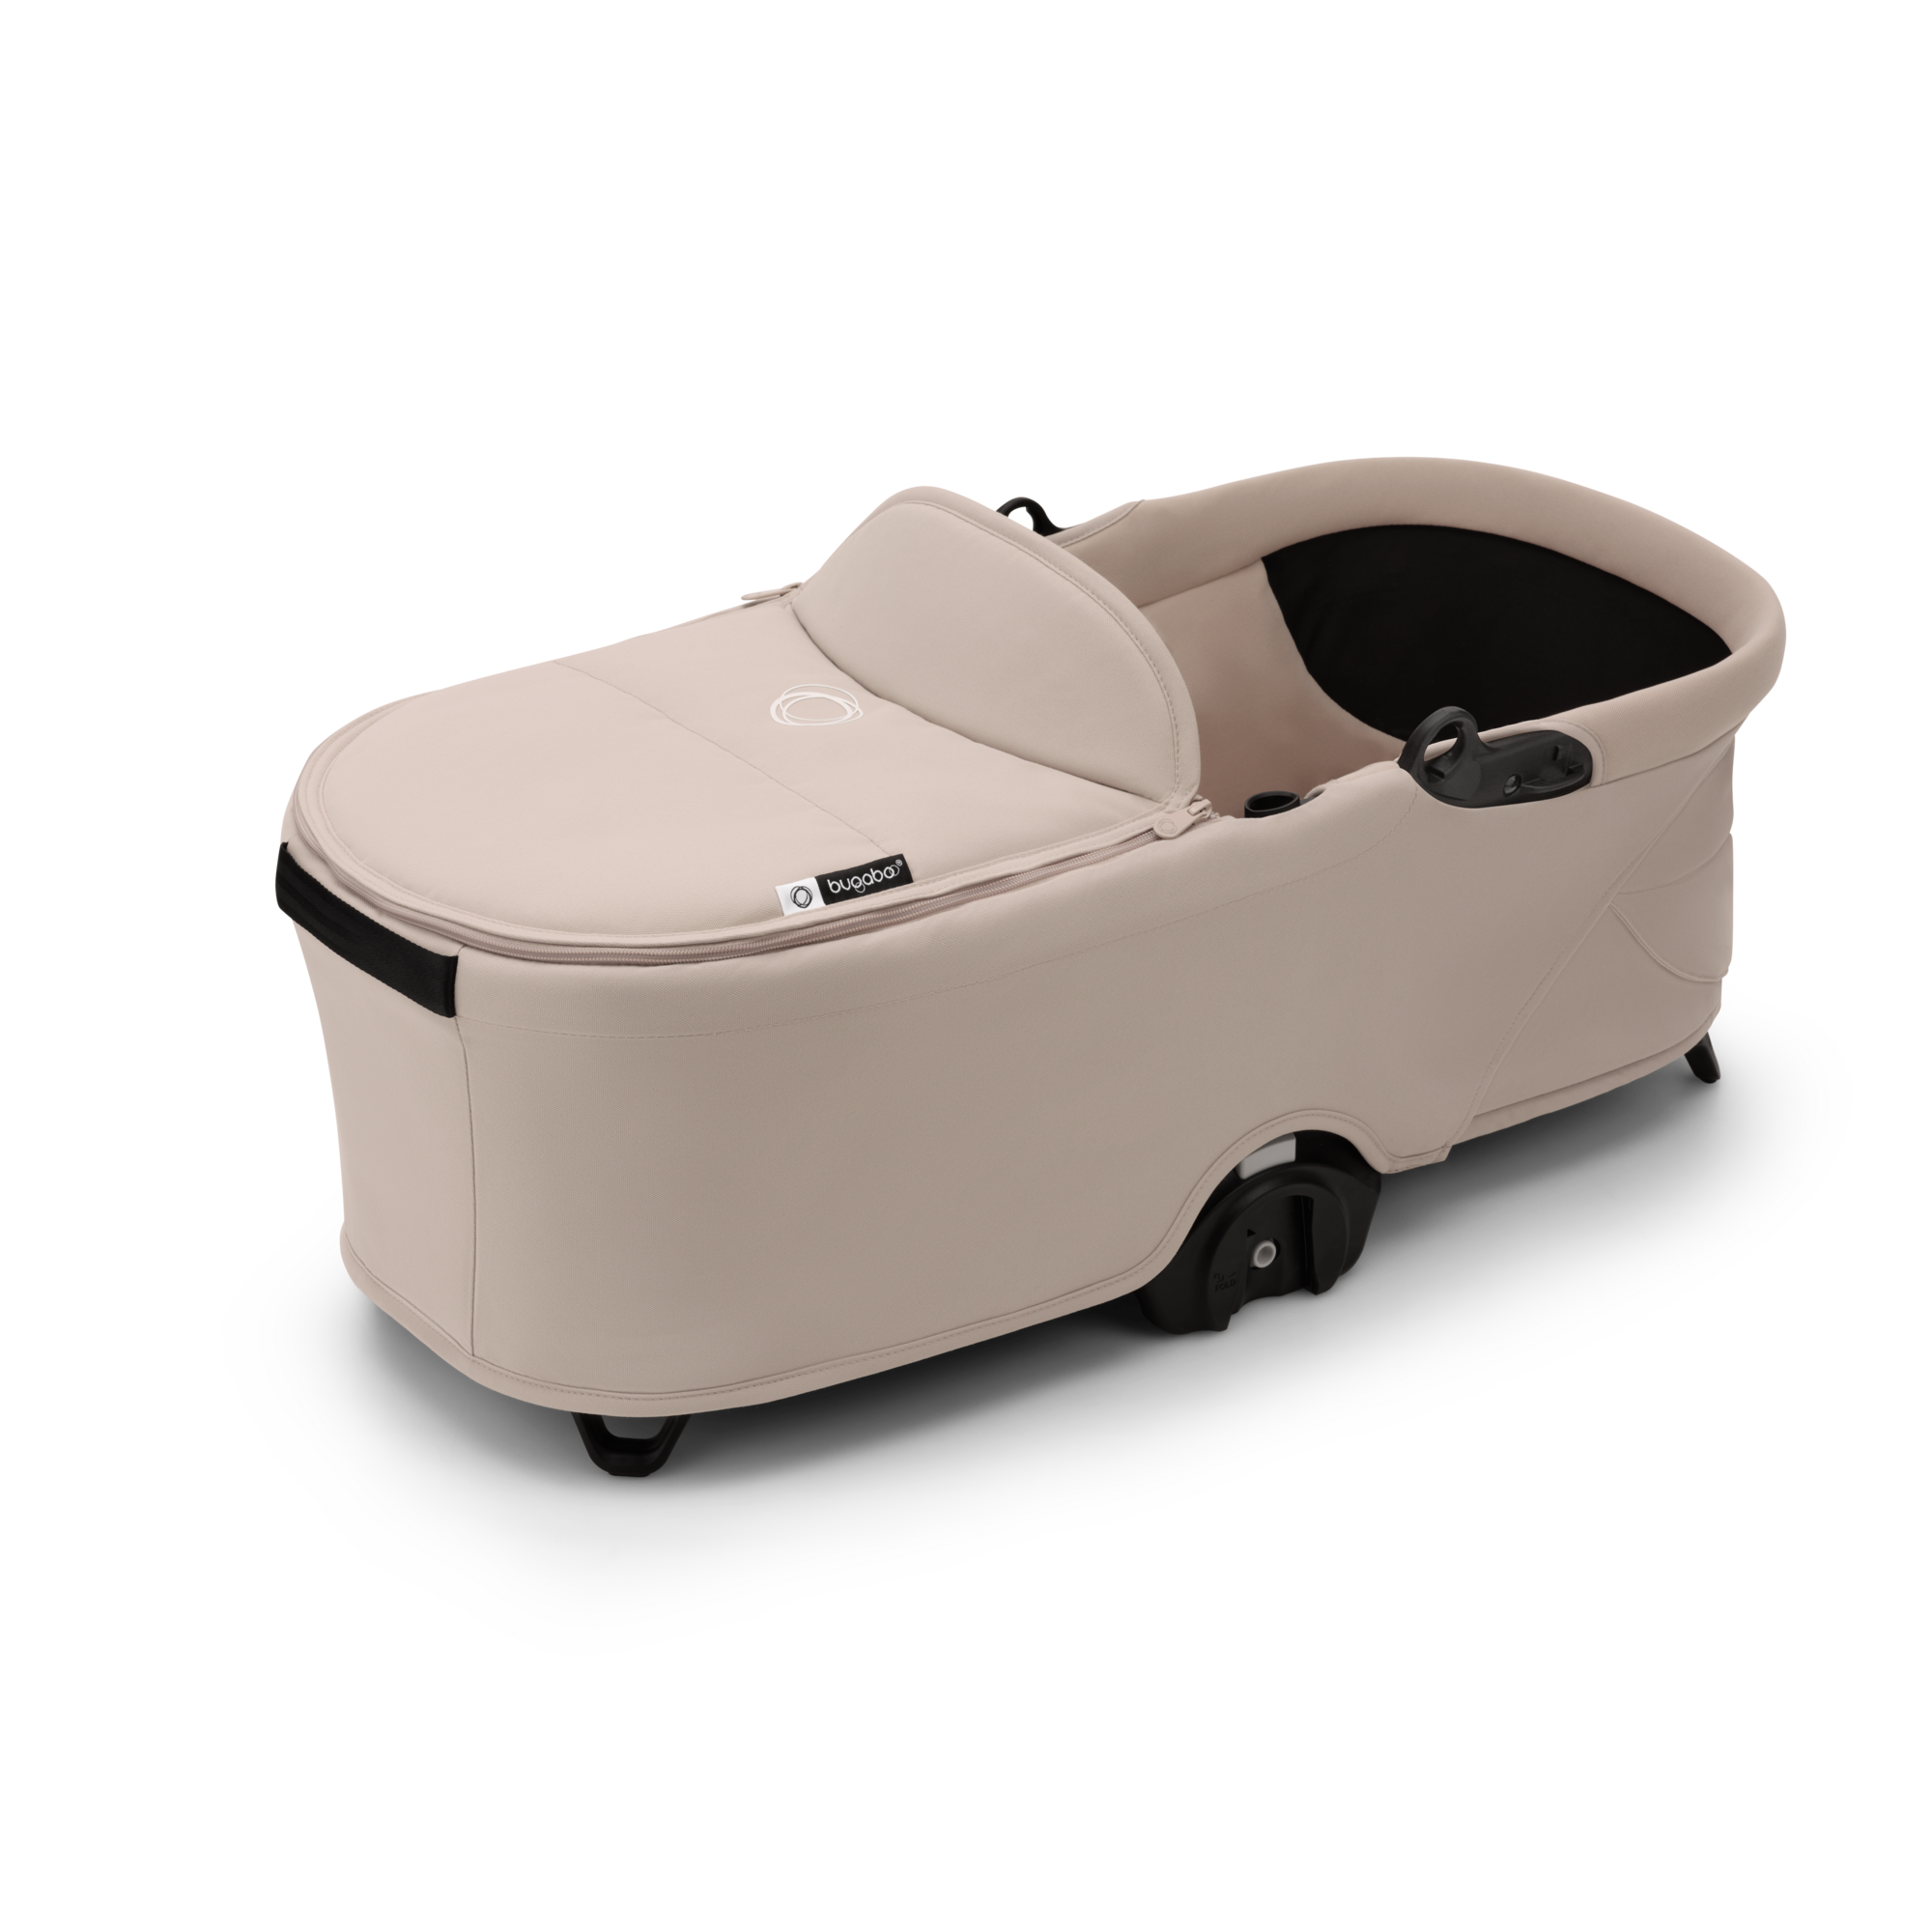 Bugaboo Dragonfly bassinet complete